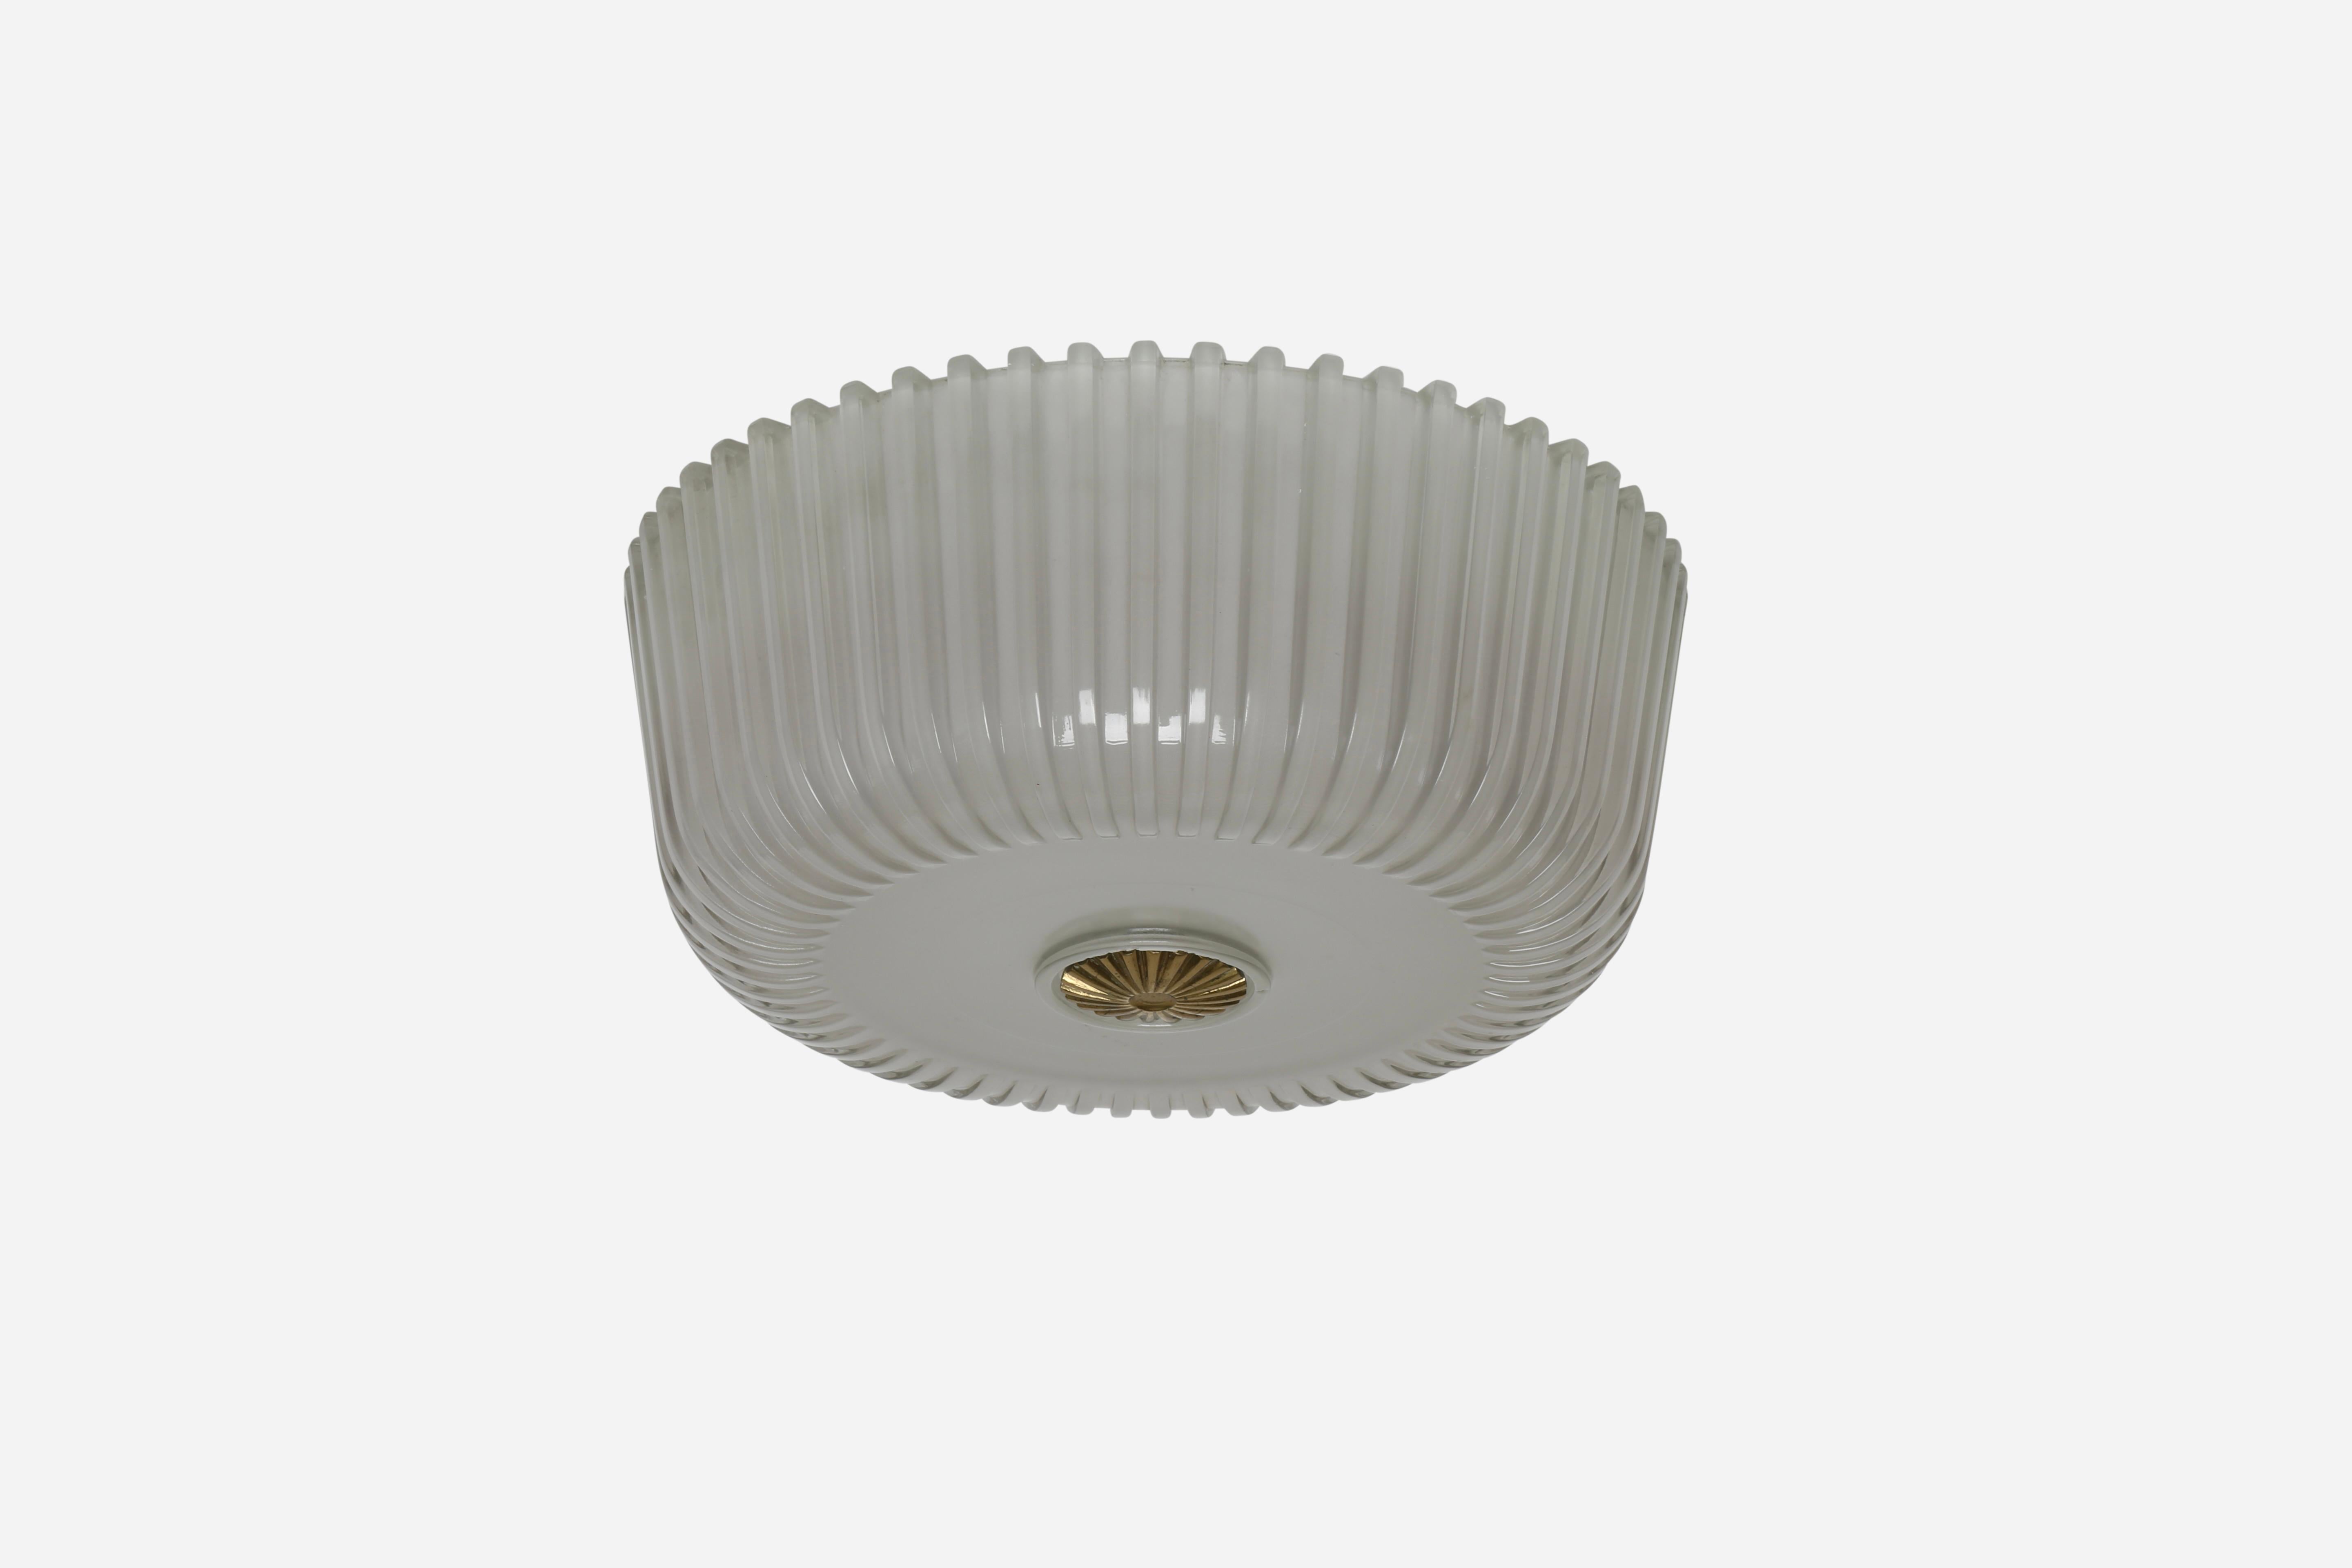 Murano glass flush mount ceiling light by Seguso.
Made in Italy in 1940s.
Murano ribbed glass, brass, metal.
4 medium base sockets.
Rewired for US.

We take pride in bringing vintage fixtures to their full glory again.
At Illustris Lighting our main